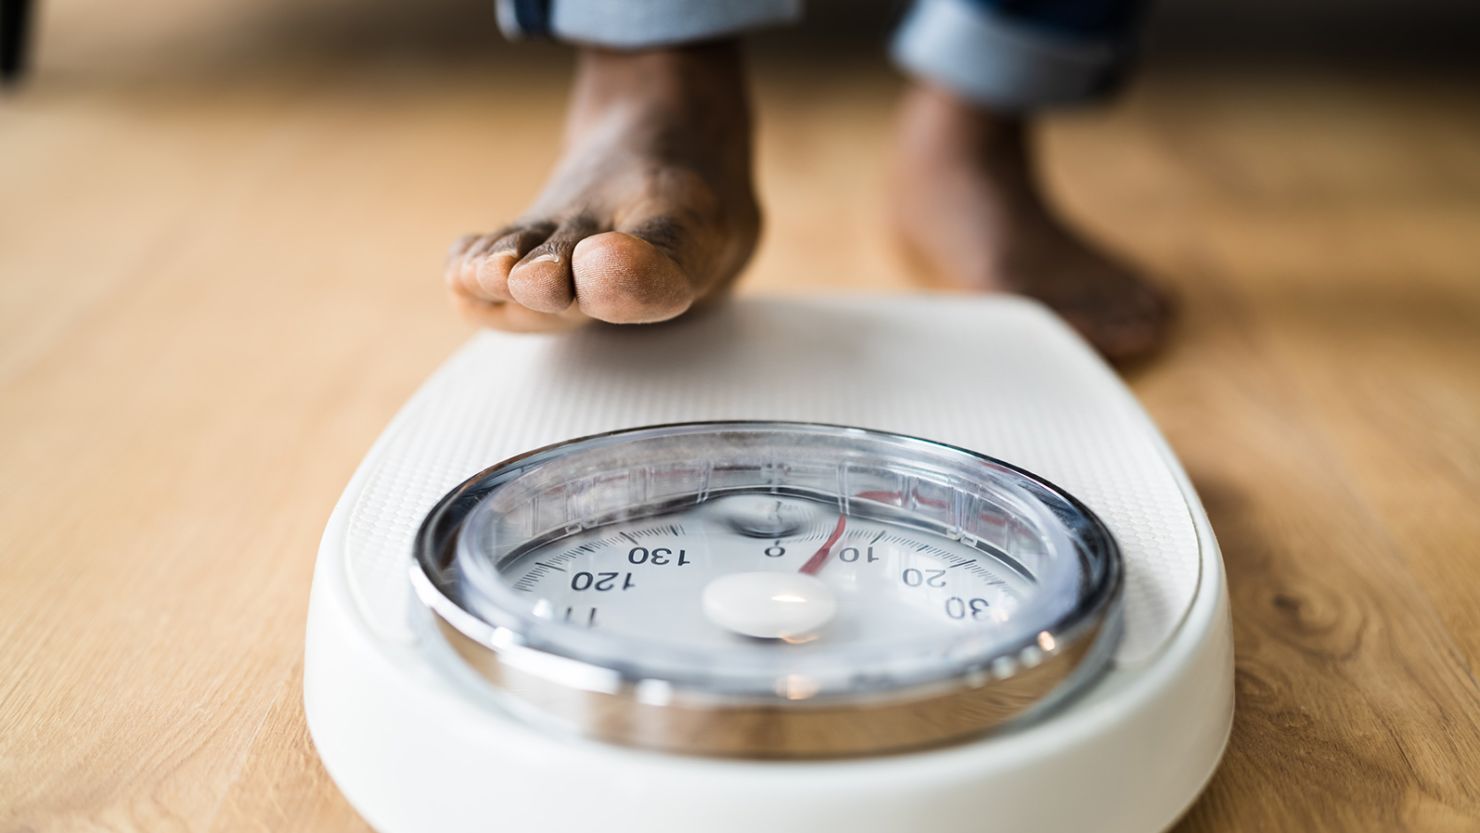 What Is the Difference Between Home Scales and Medical Scales?